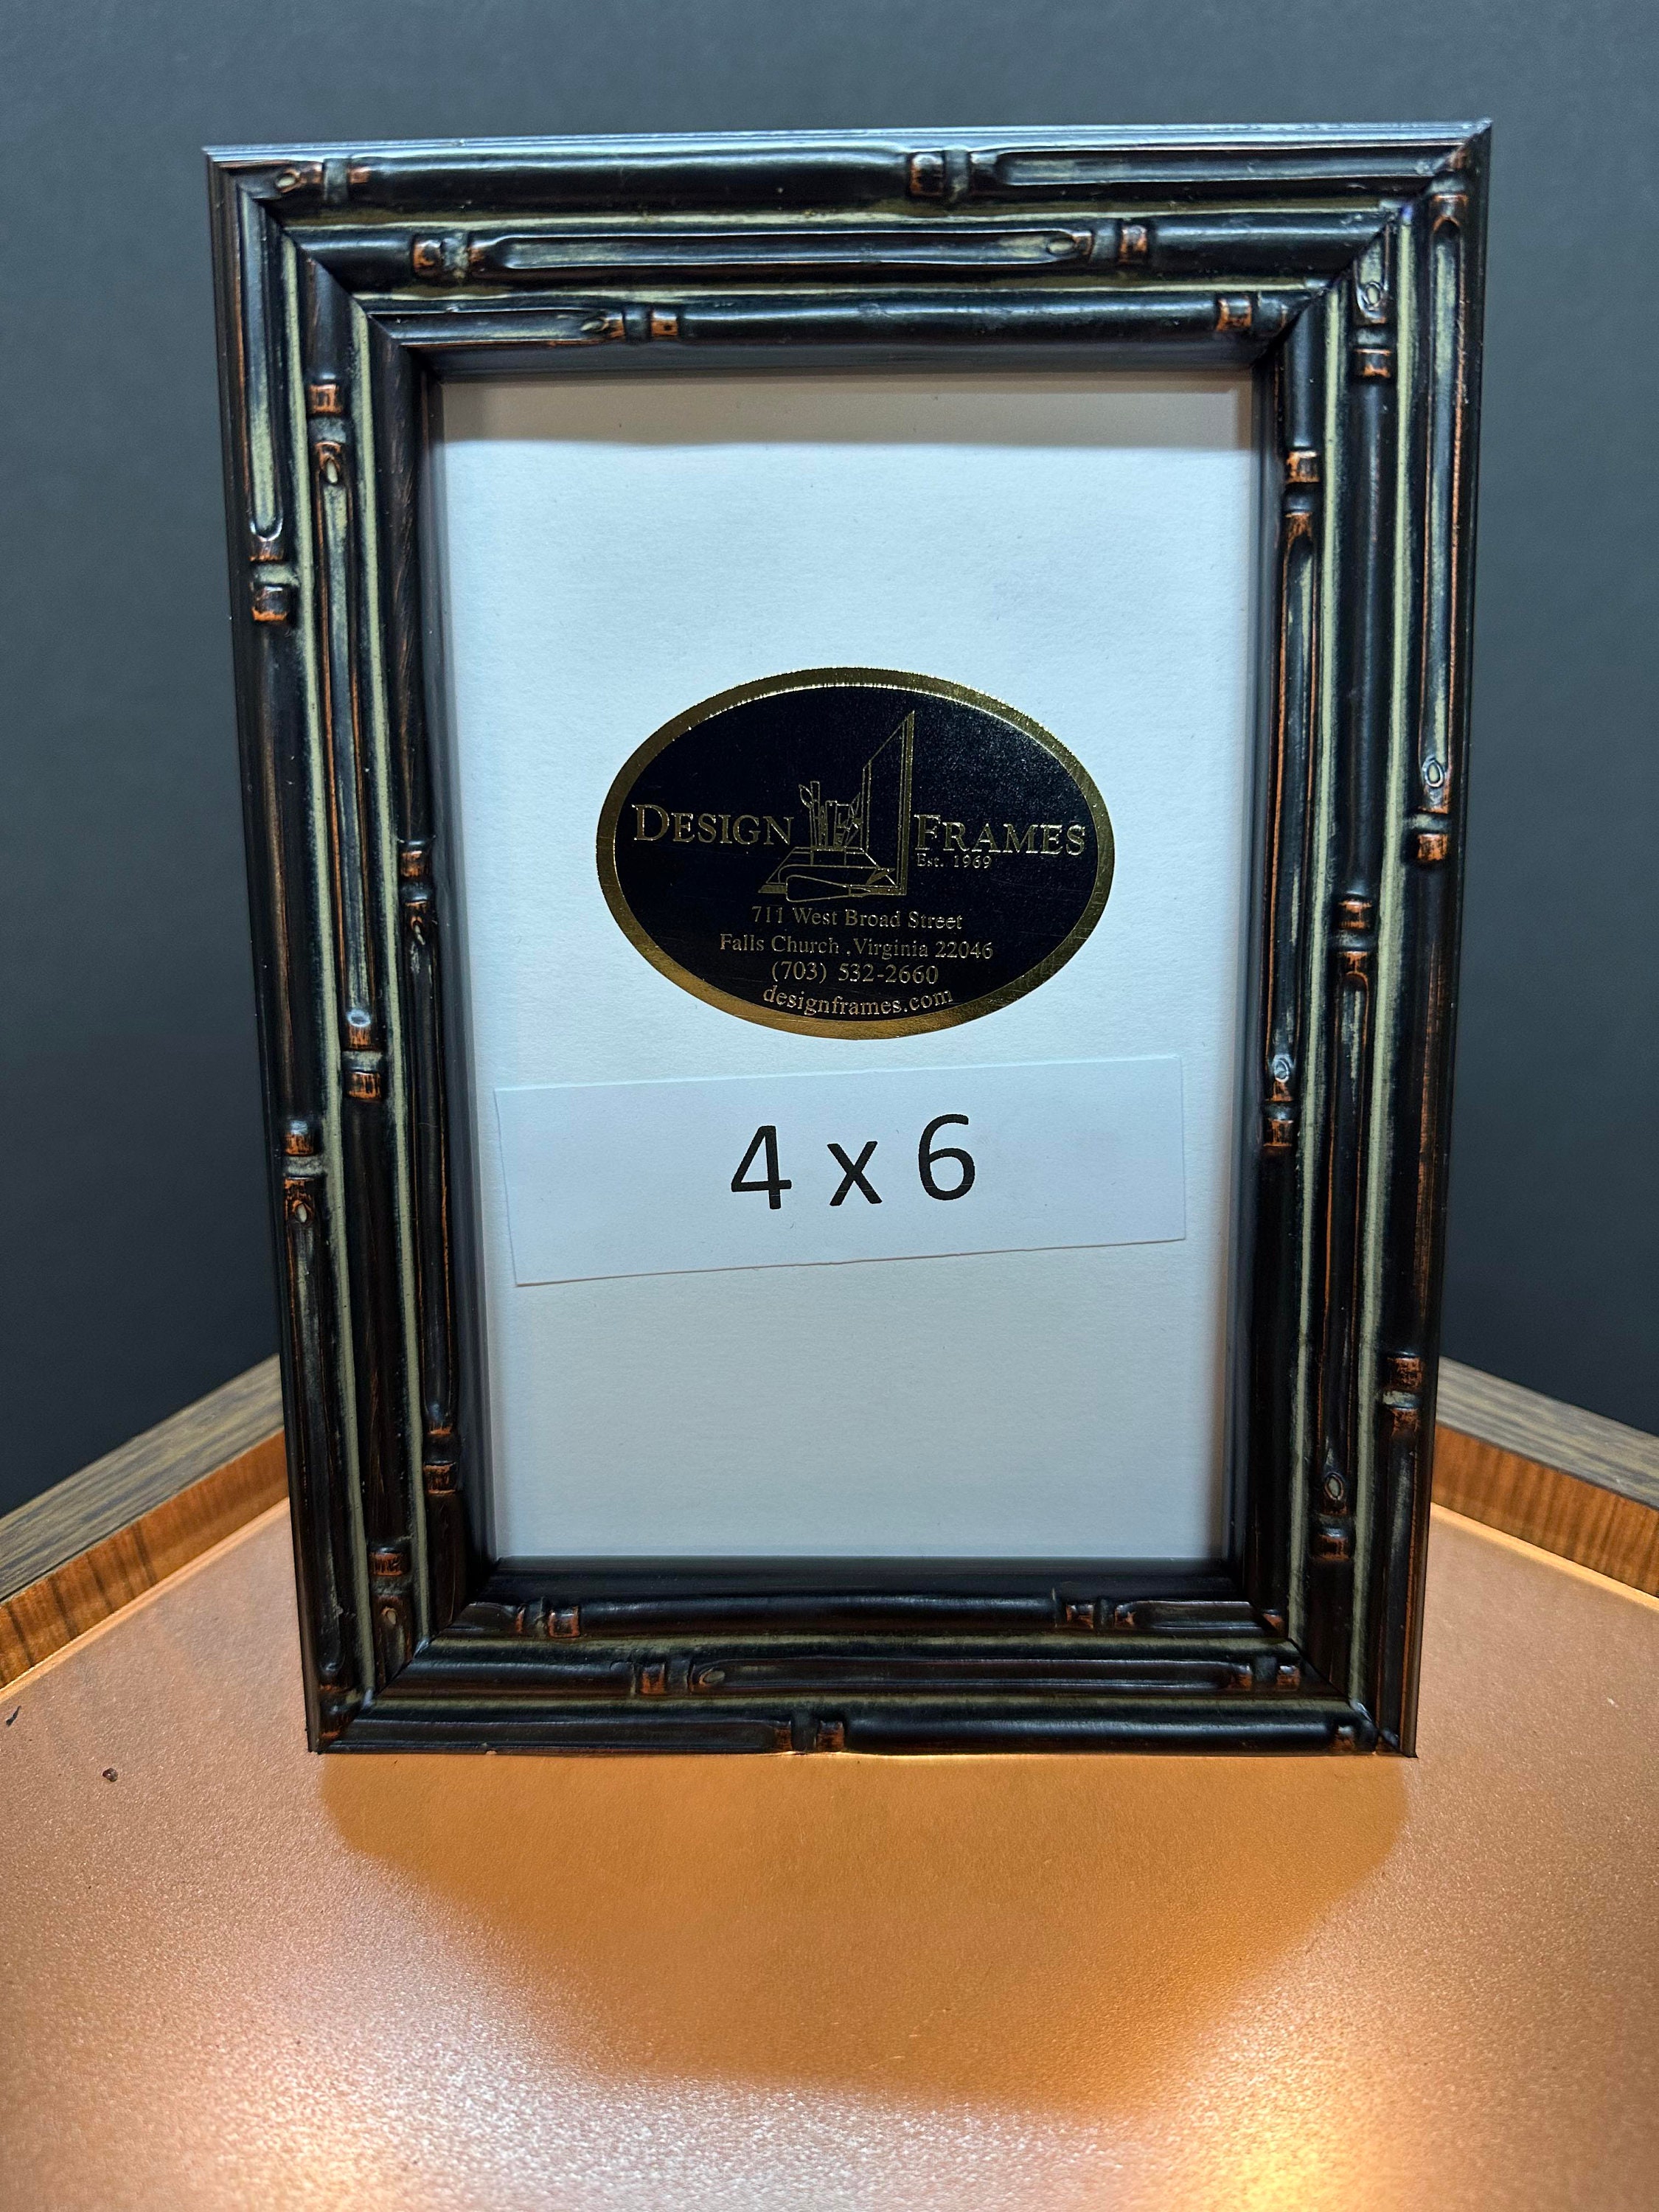 Richland Metal Hanging Photo Frame 6 x 6.25 Set of 6 by Quick Candles